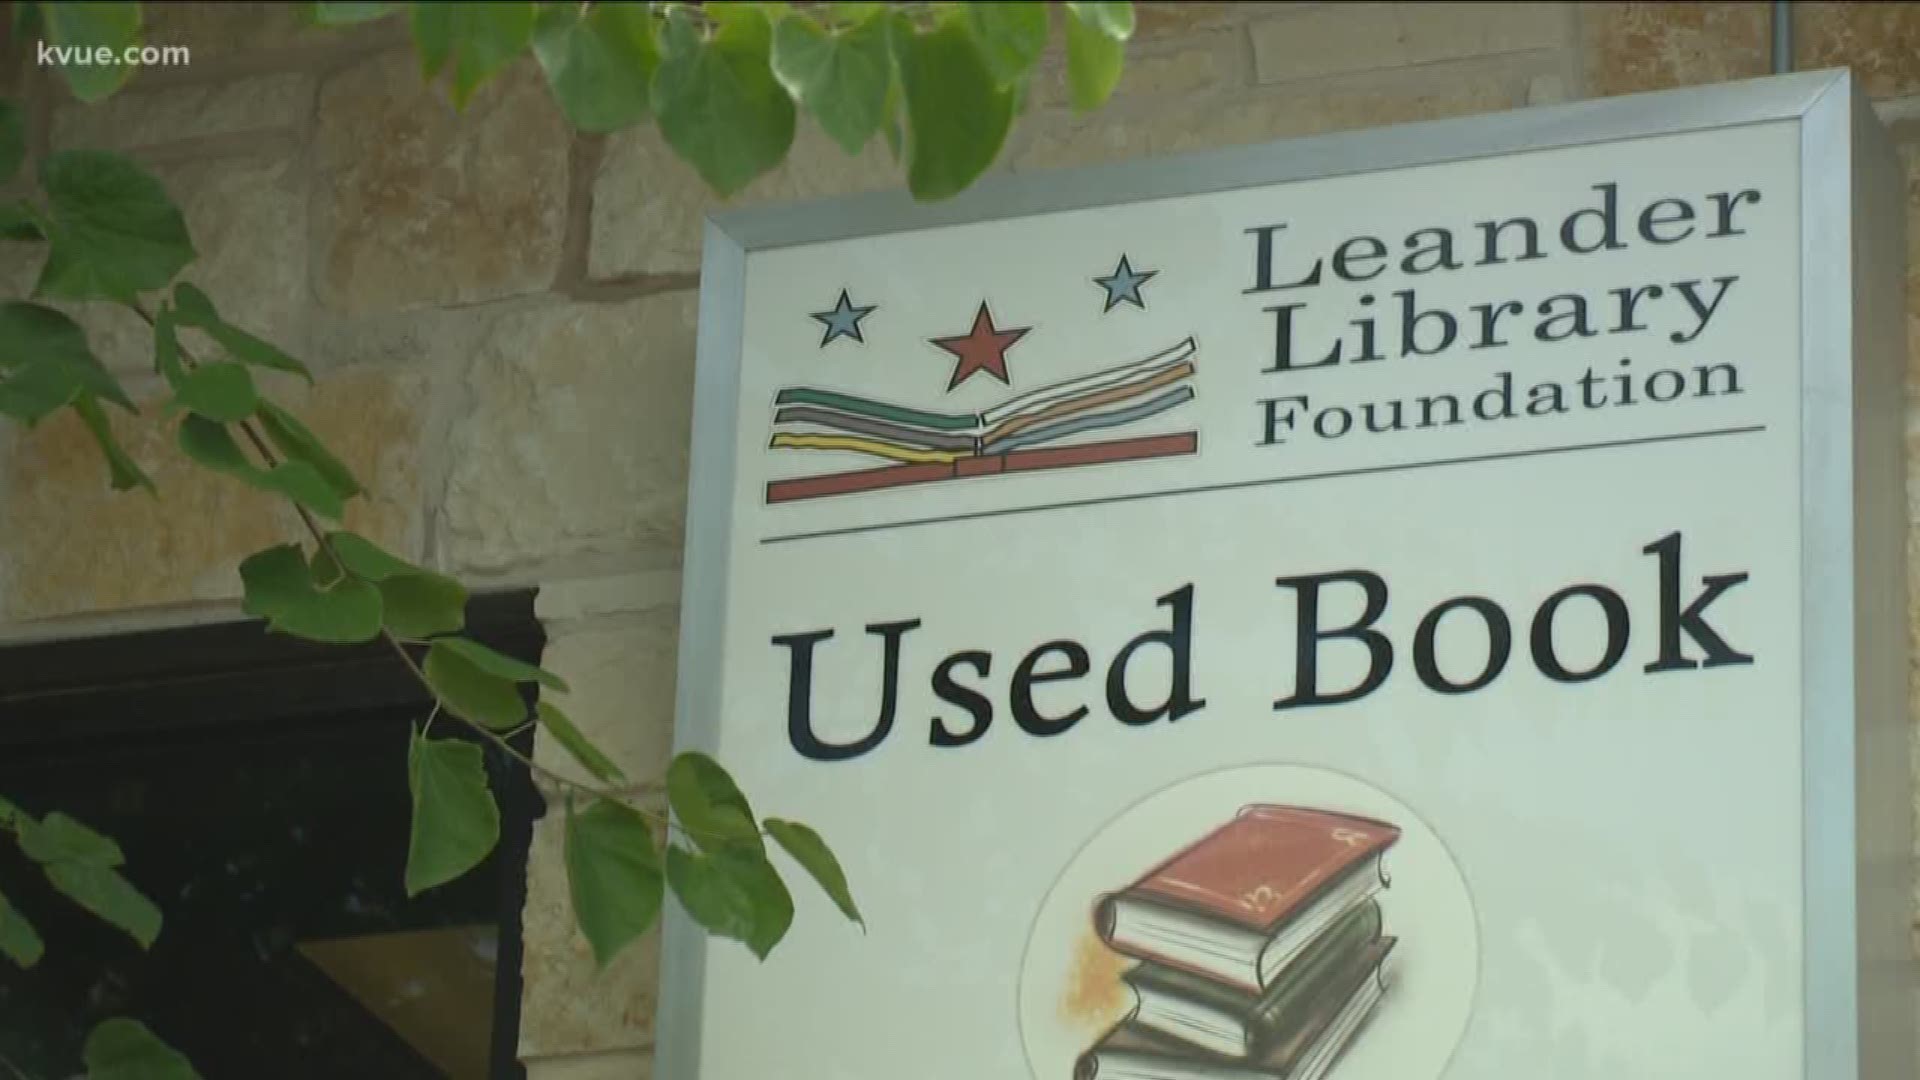 A big controversy about the library and drag queens has Leander taking a long hard look at their policies. A meeting is planned to discuss potential changes.